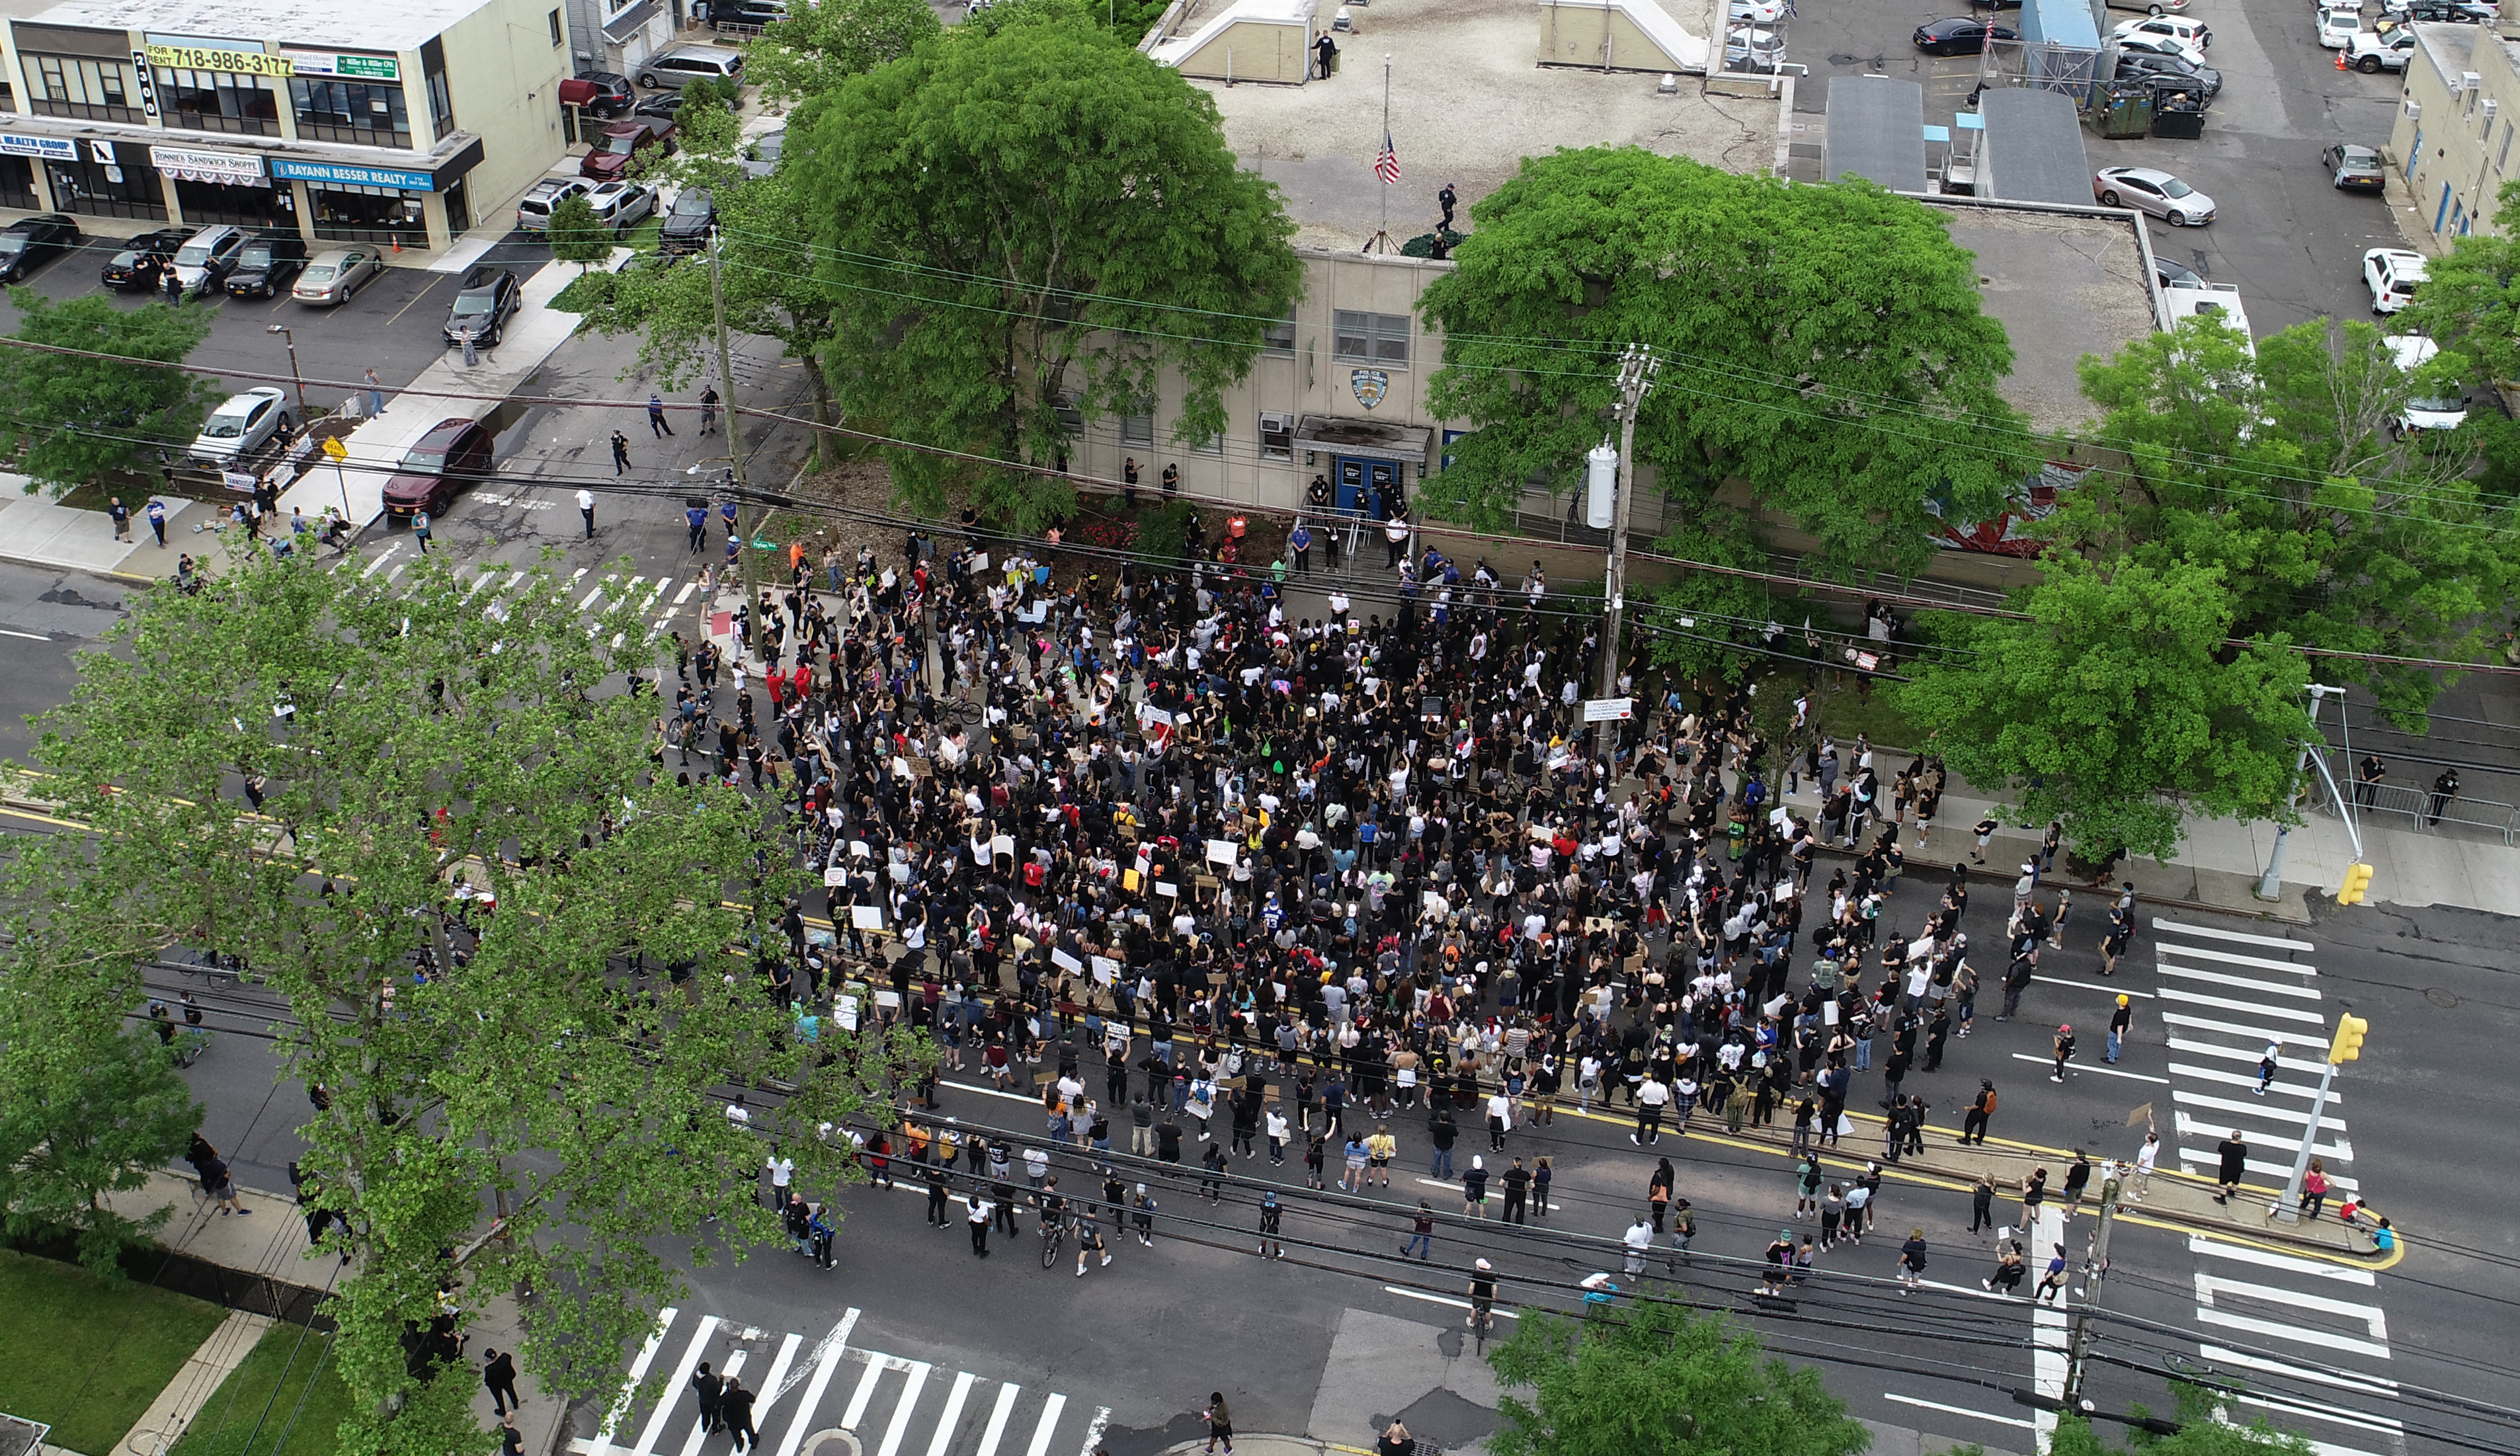 A birds eye view of over 400 protester outside of the 122nd Precinct stationhouse in New Dorp on Friday, June 5, 2020. (Staten Island Advance/Alexandra Salmieri)